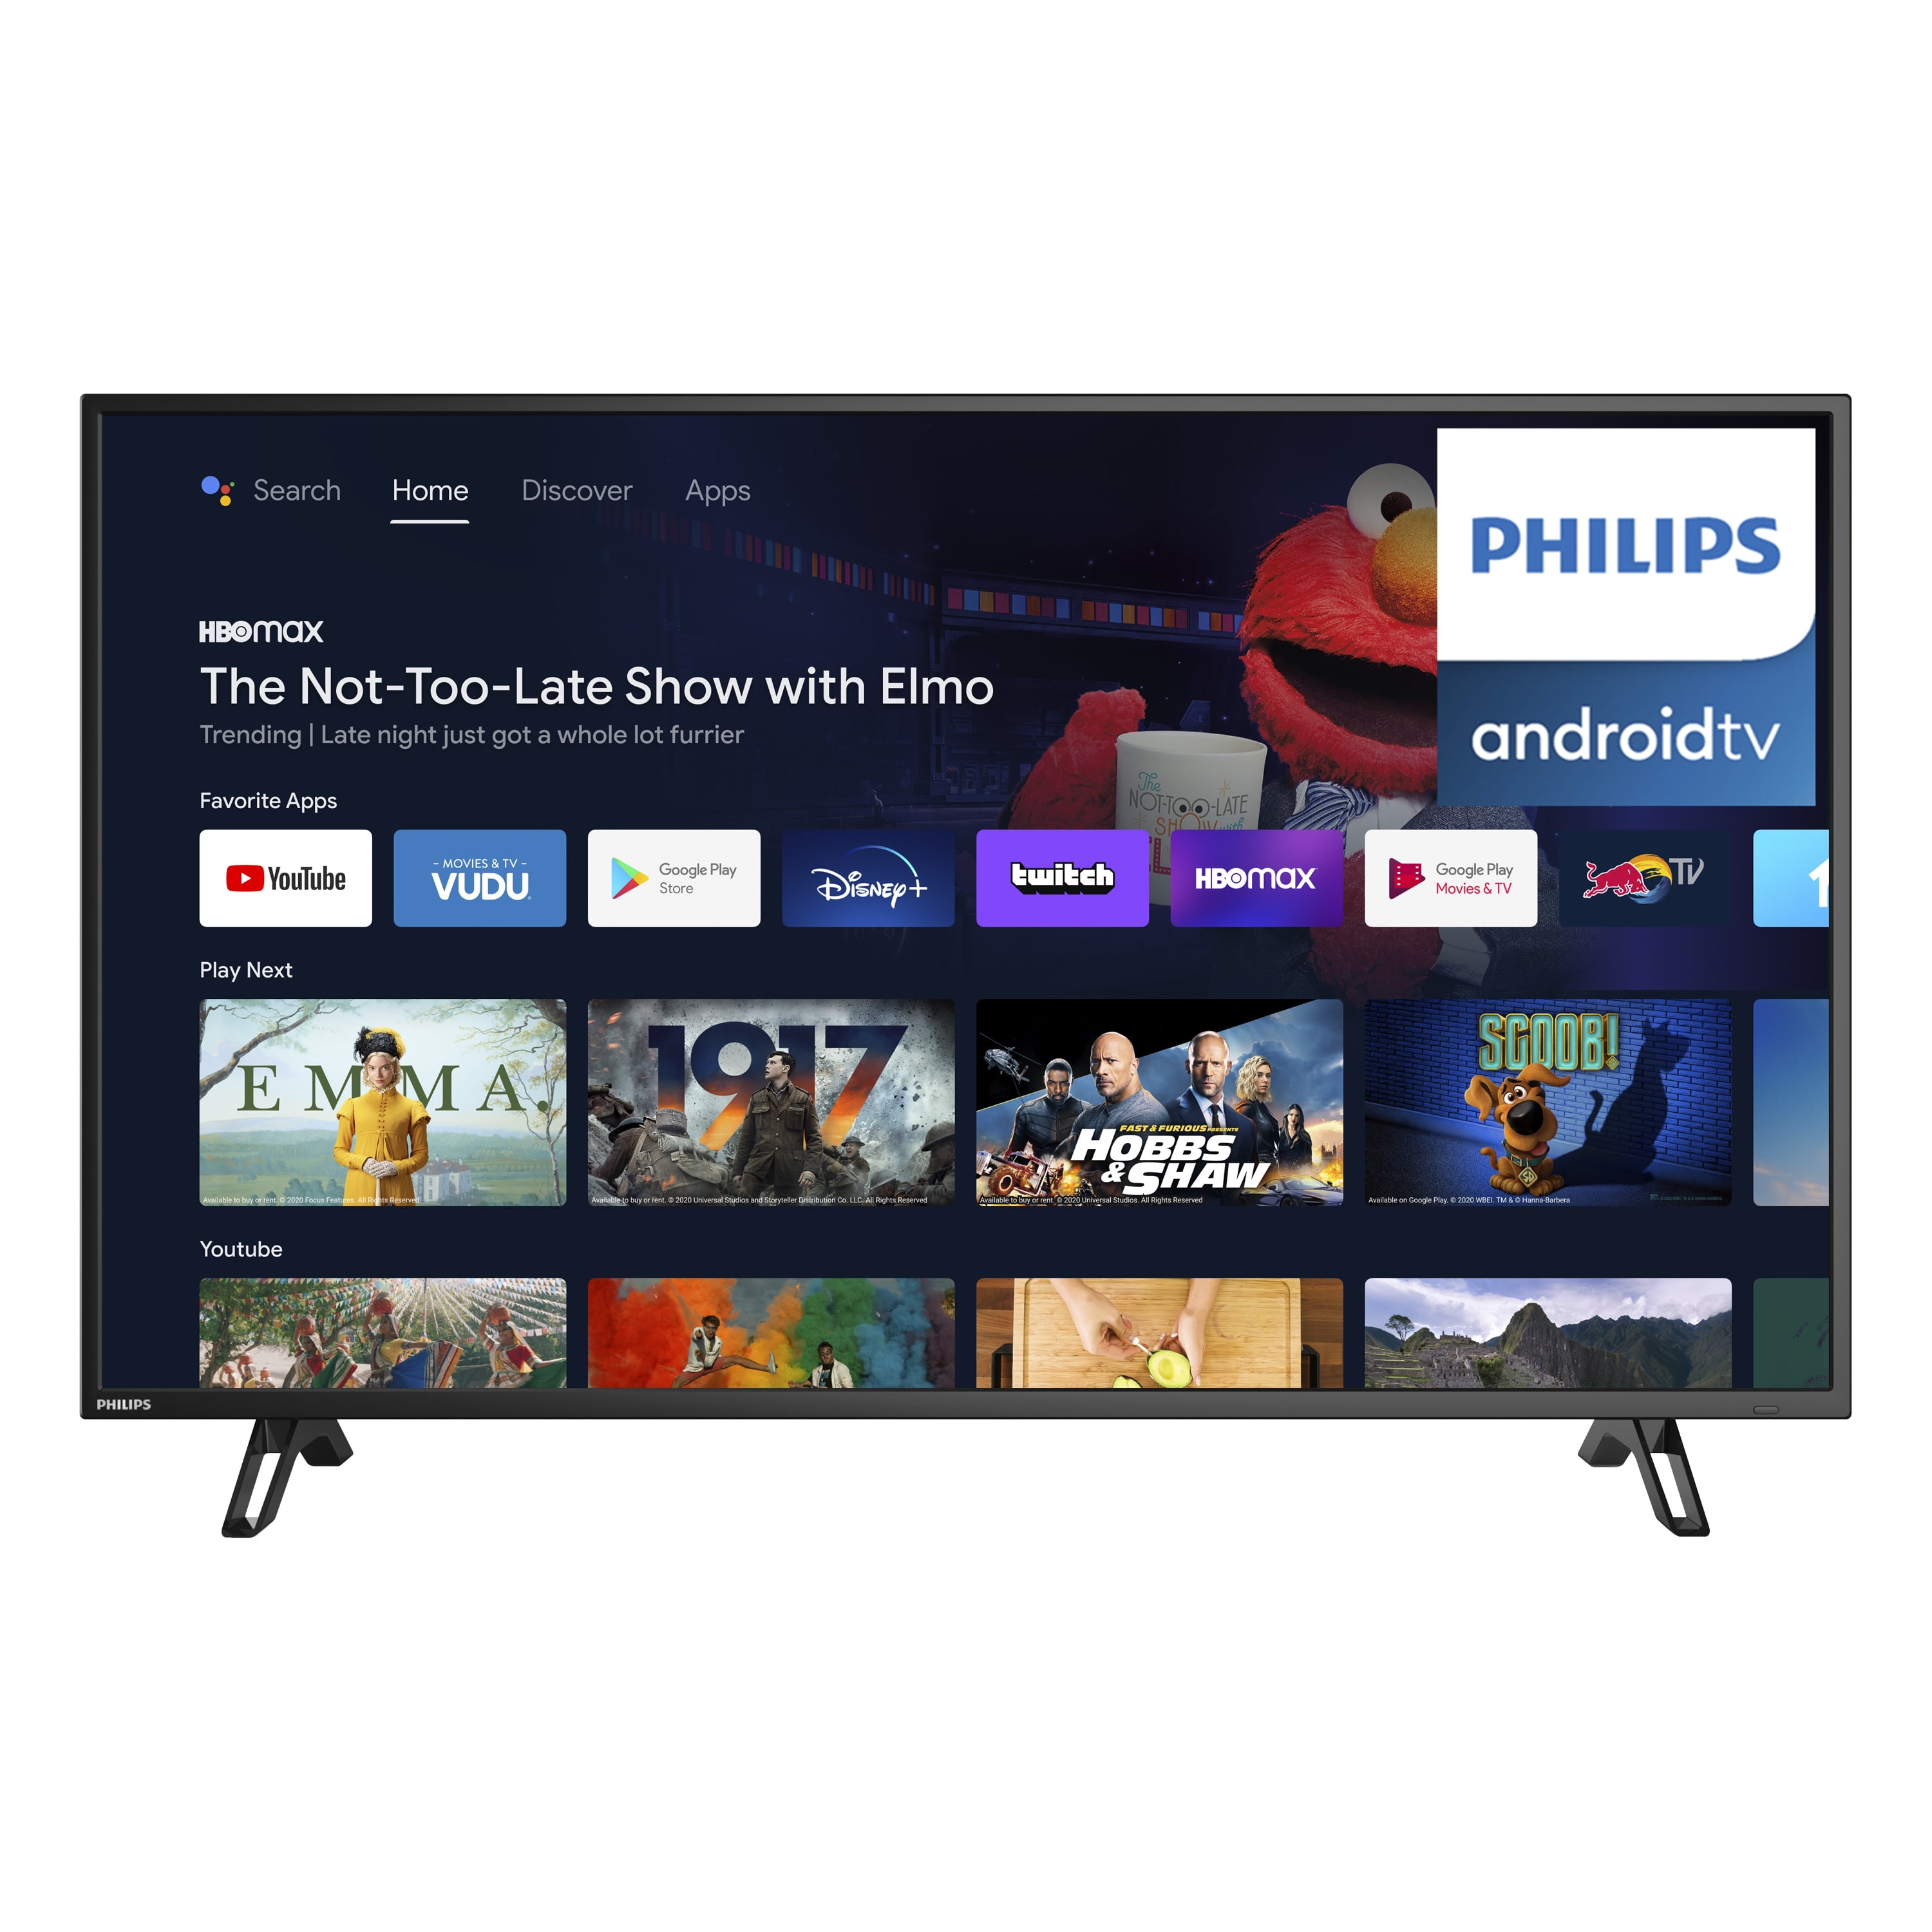 Philips Class 4K Ultra (2160p) Android Smart TV with Google Assistant (43PFL5766/F7) - Walmart.com